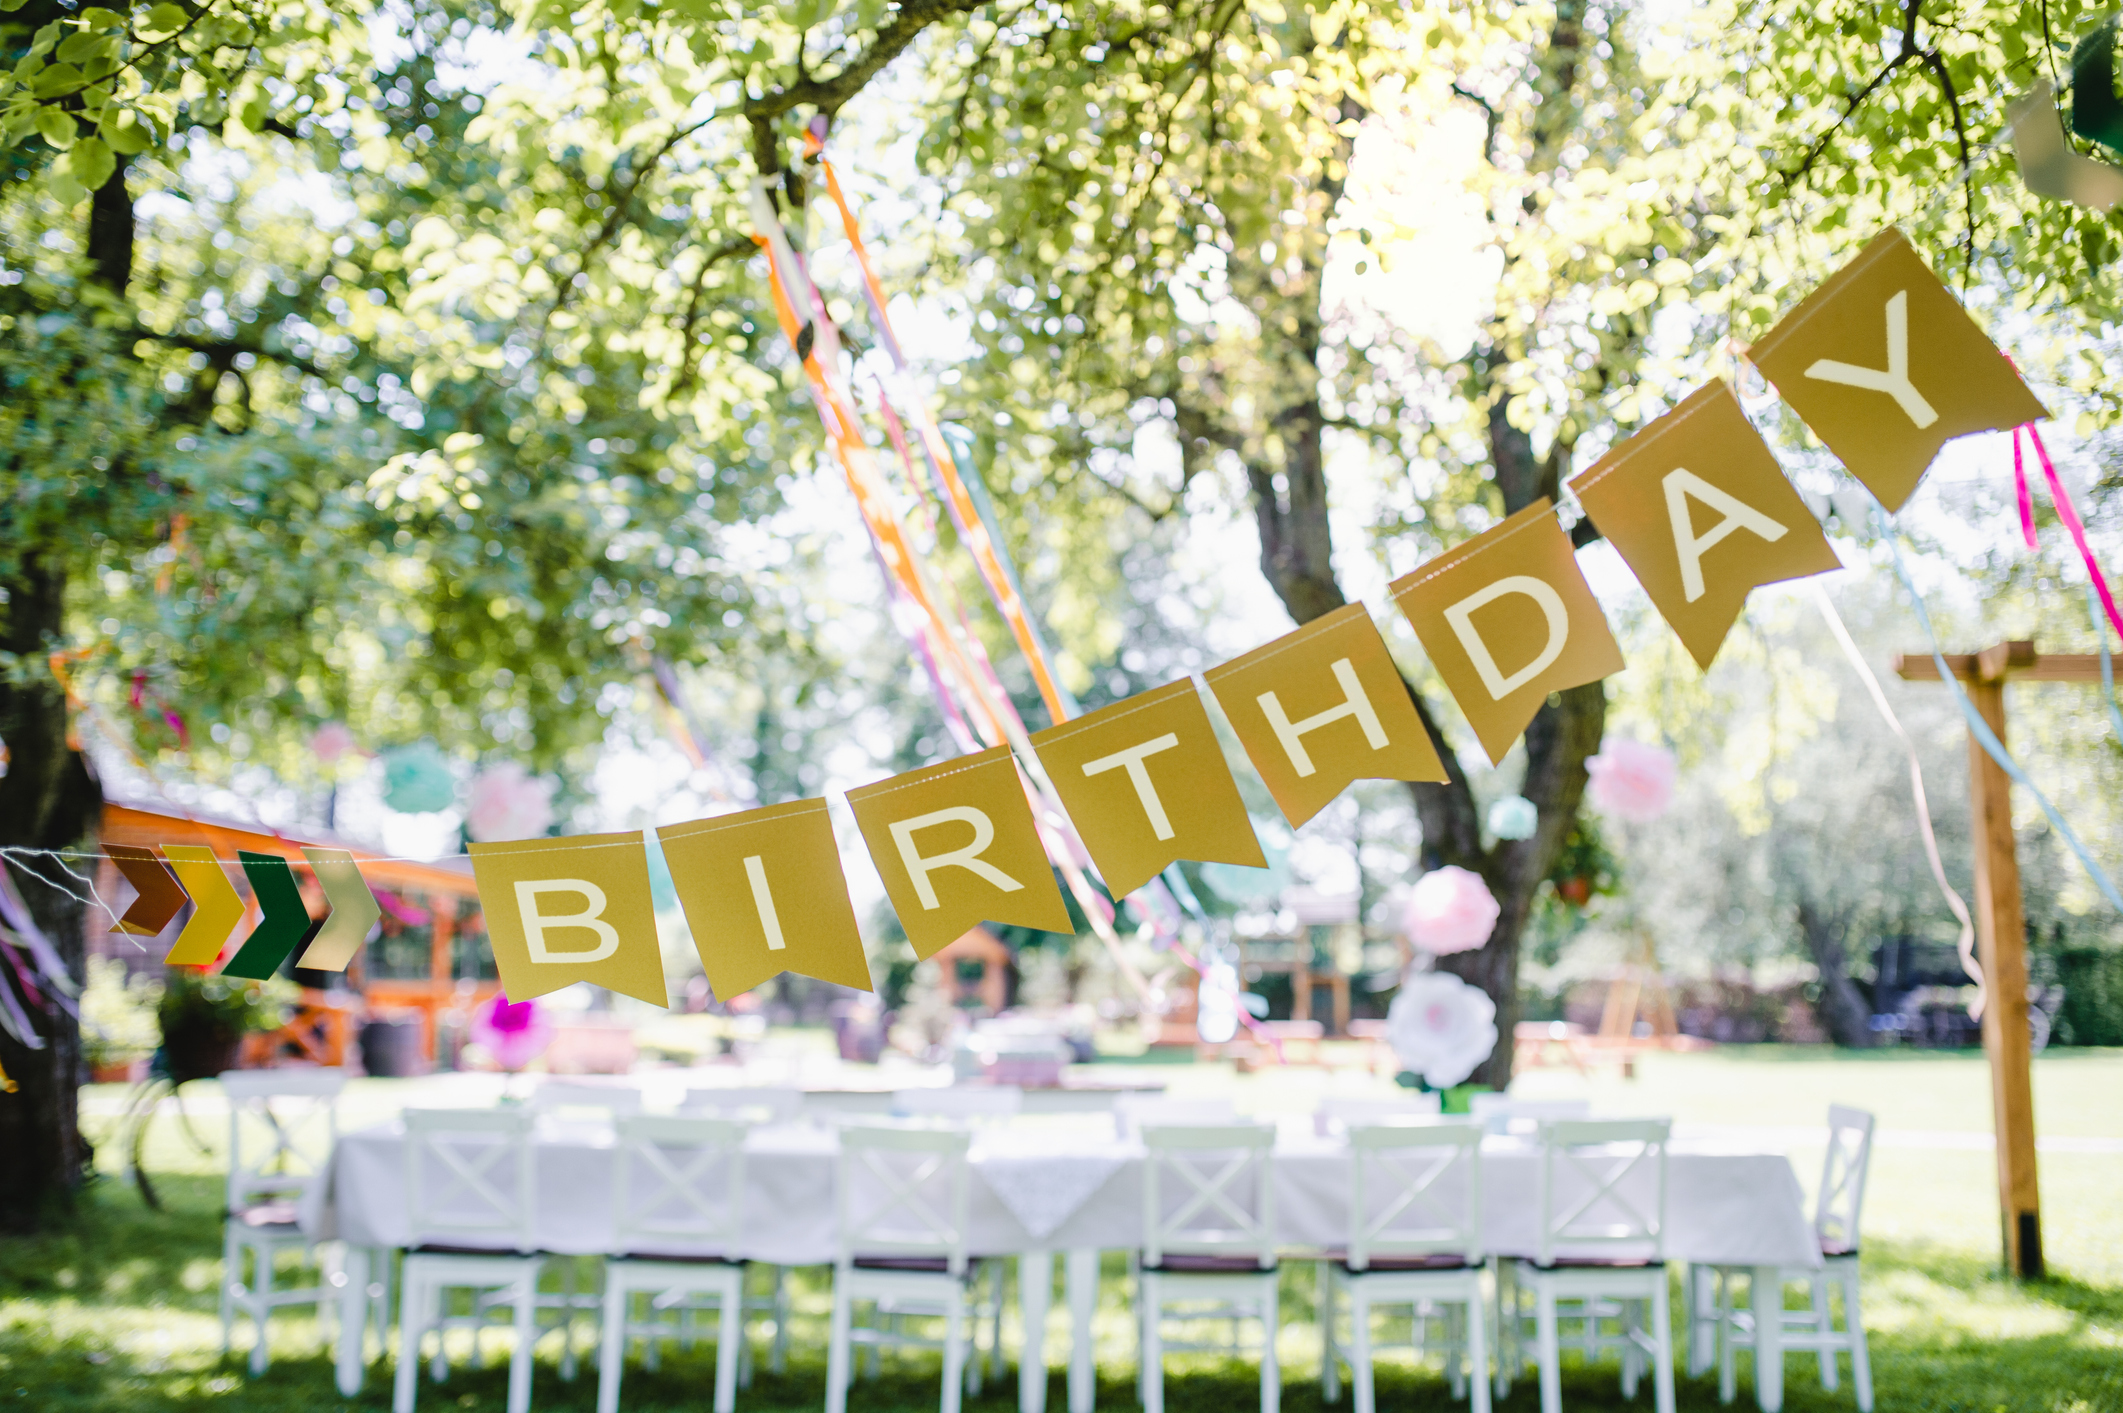 Outdoor image with birthday banner hanging in the trees